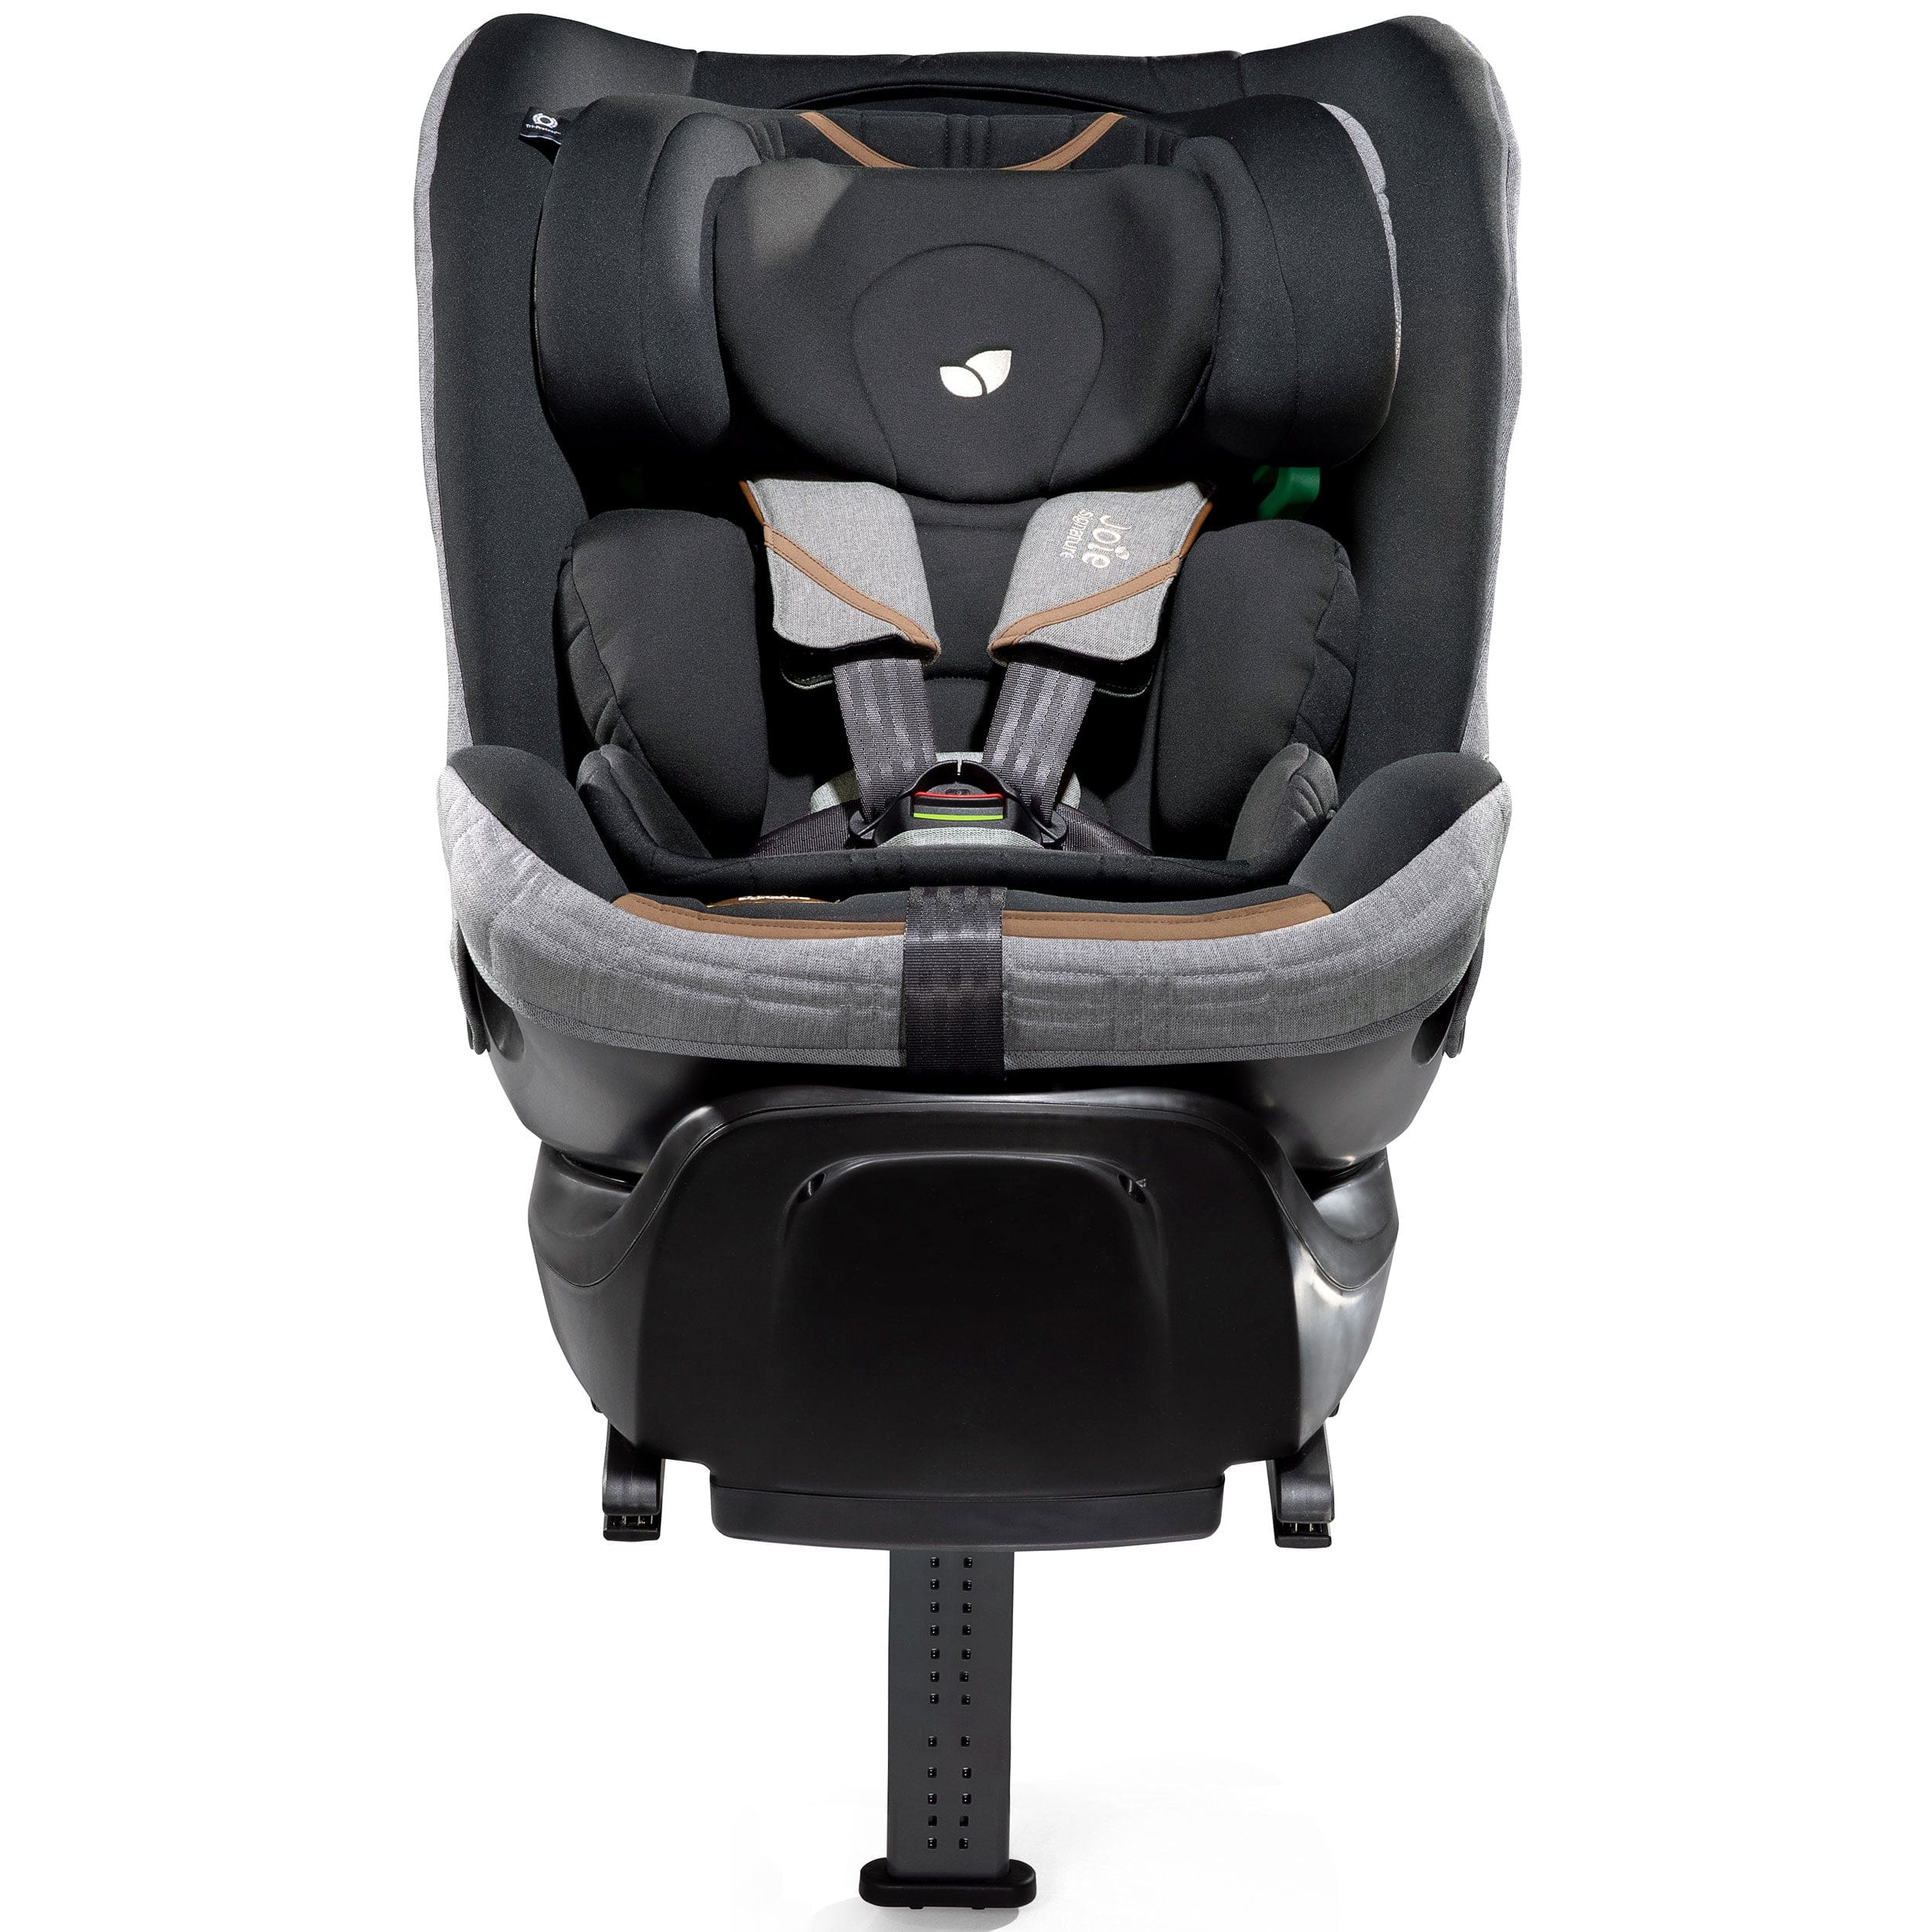 Joie i-Spin XL - Carbon i-Size Car Seats C2205AACBN000 5056080615882